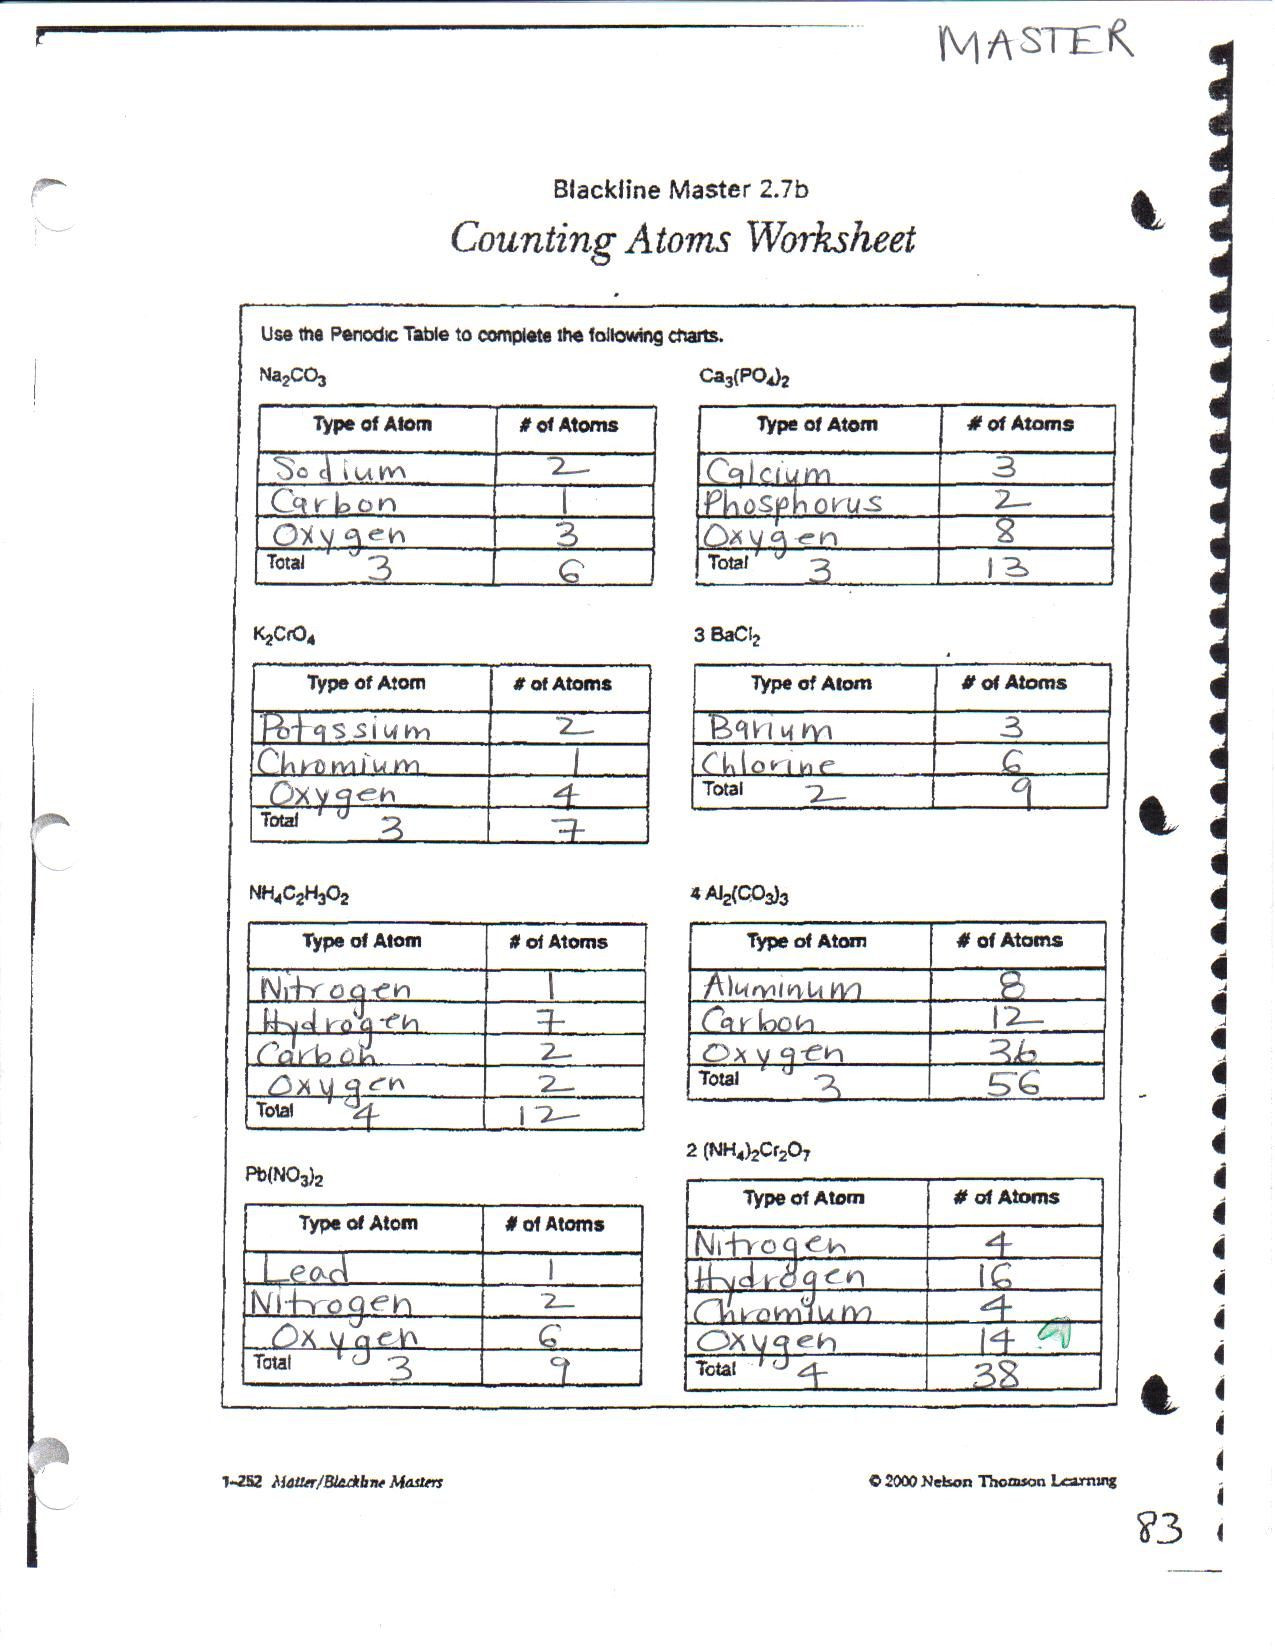 Counting atoms Worksheet Answers 31 Awesome Counting atoms Worksheet Design Ideas